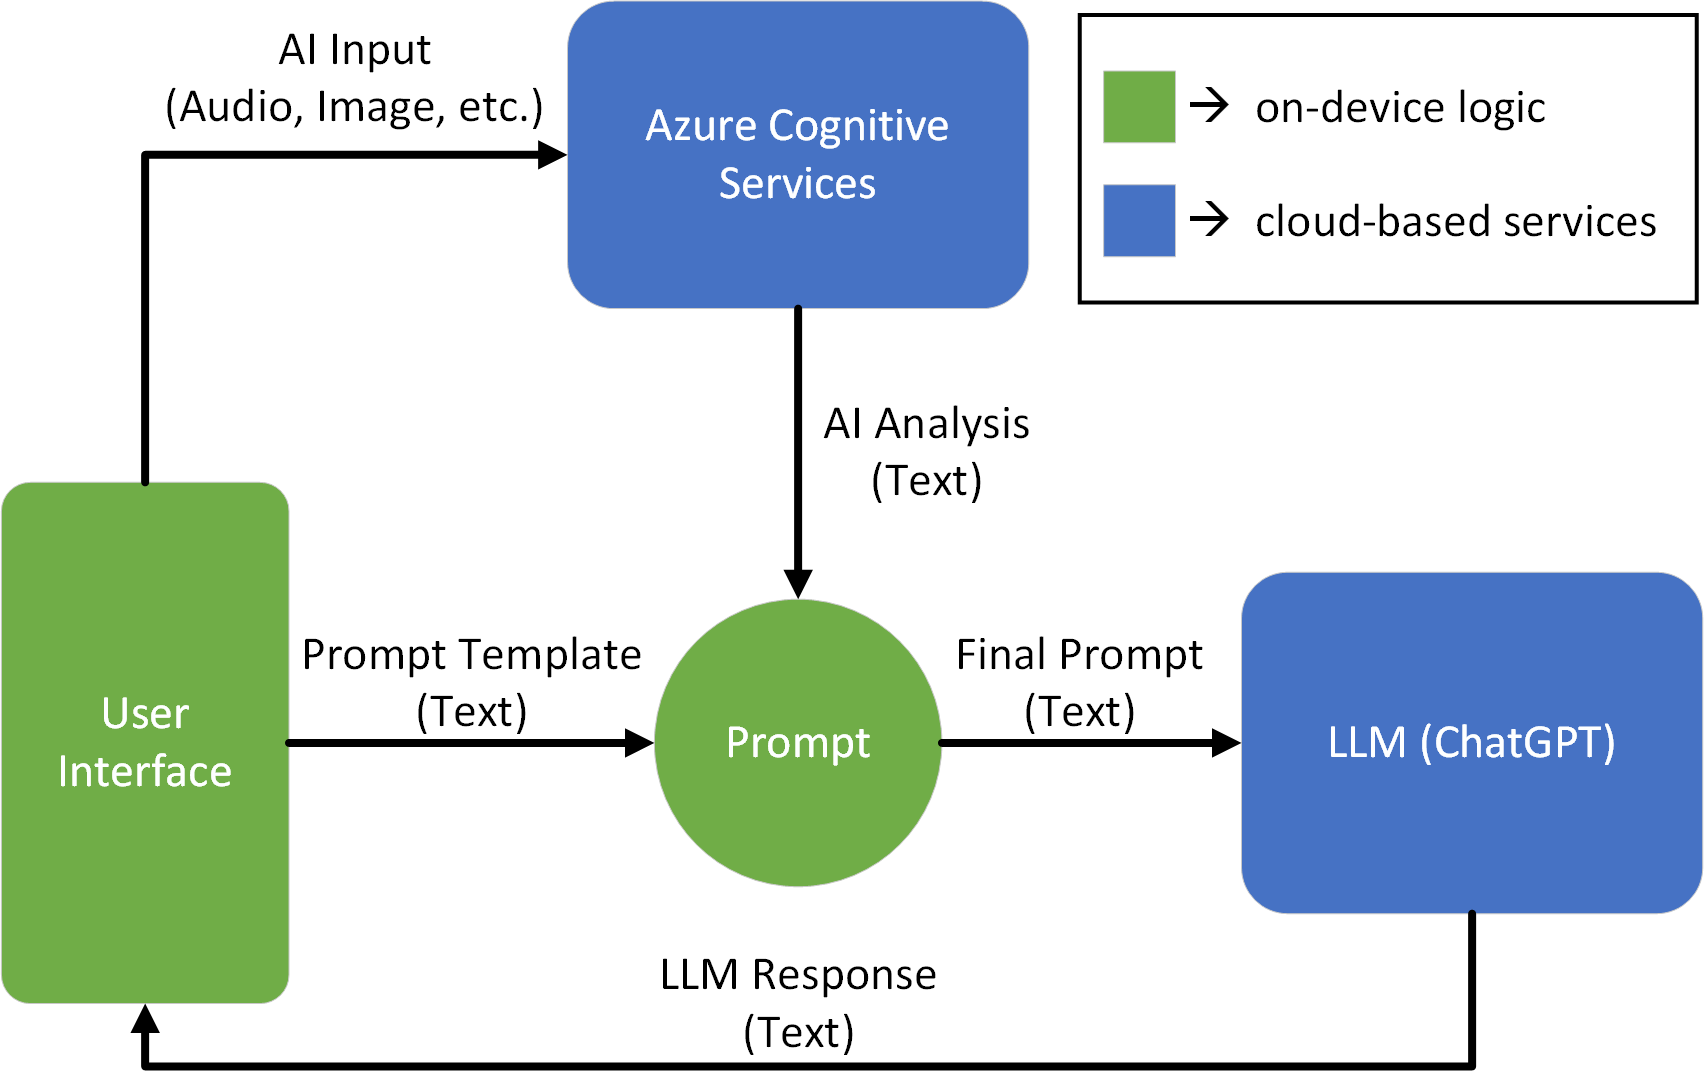 Data is passed through Azure Cognitive Services, analyzed, and added as context to the LLM prompt.